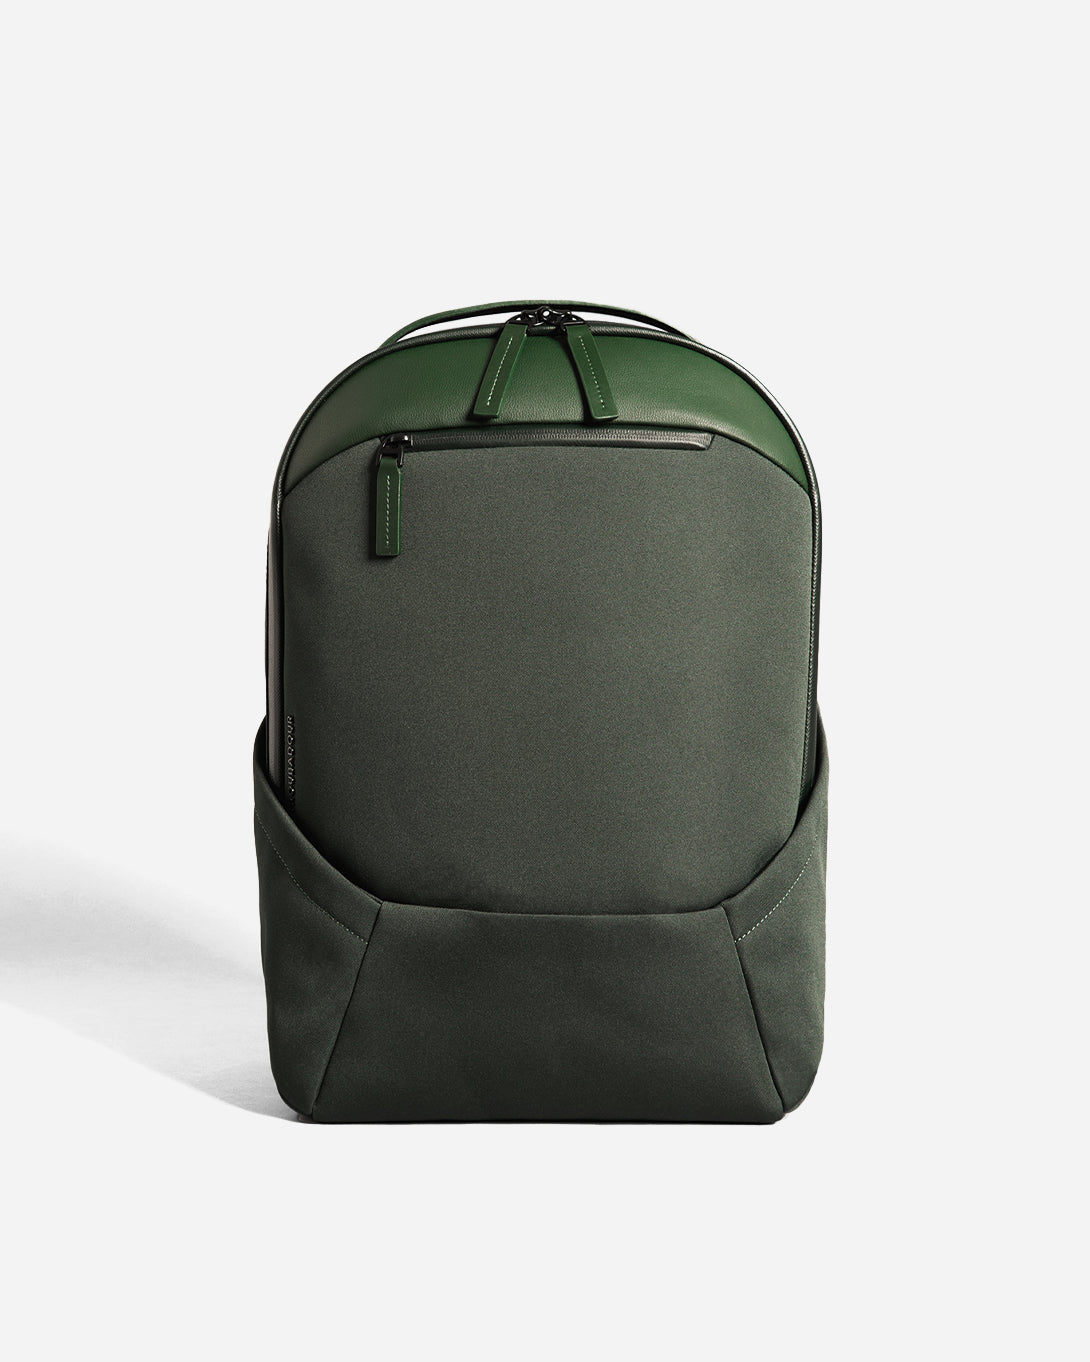 Green Apex Backpack Everyday Durable Bag